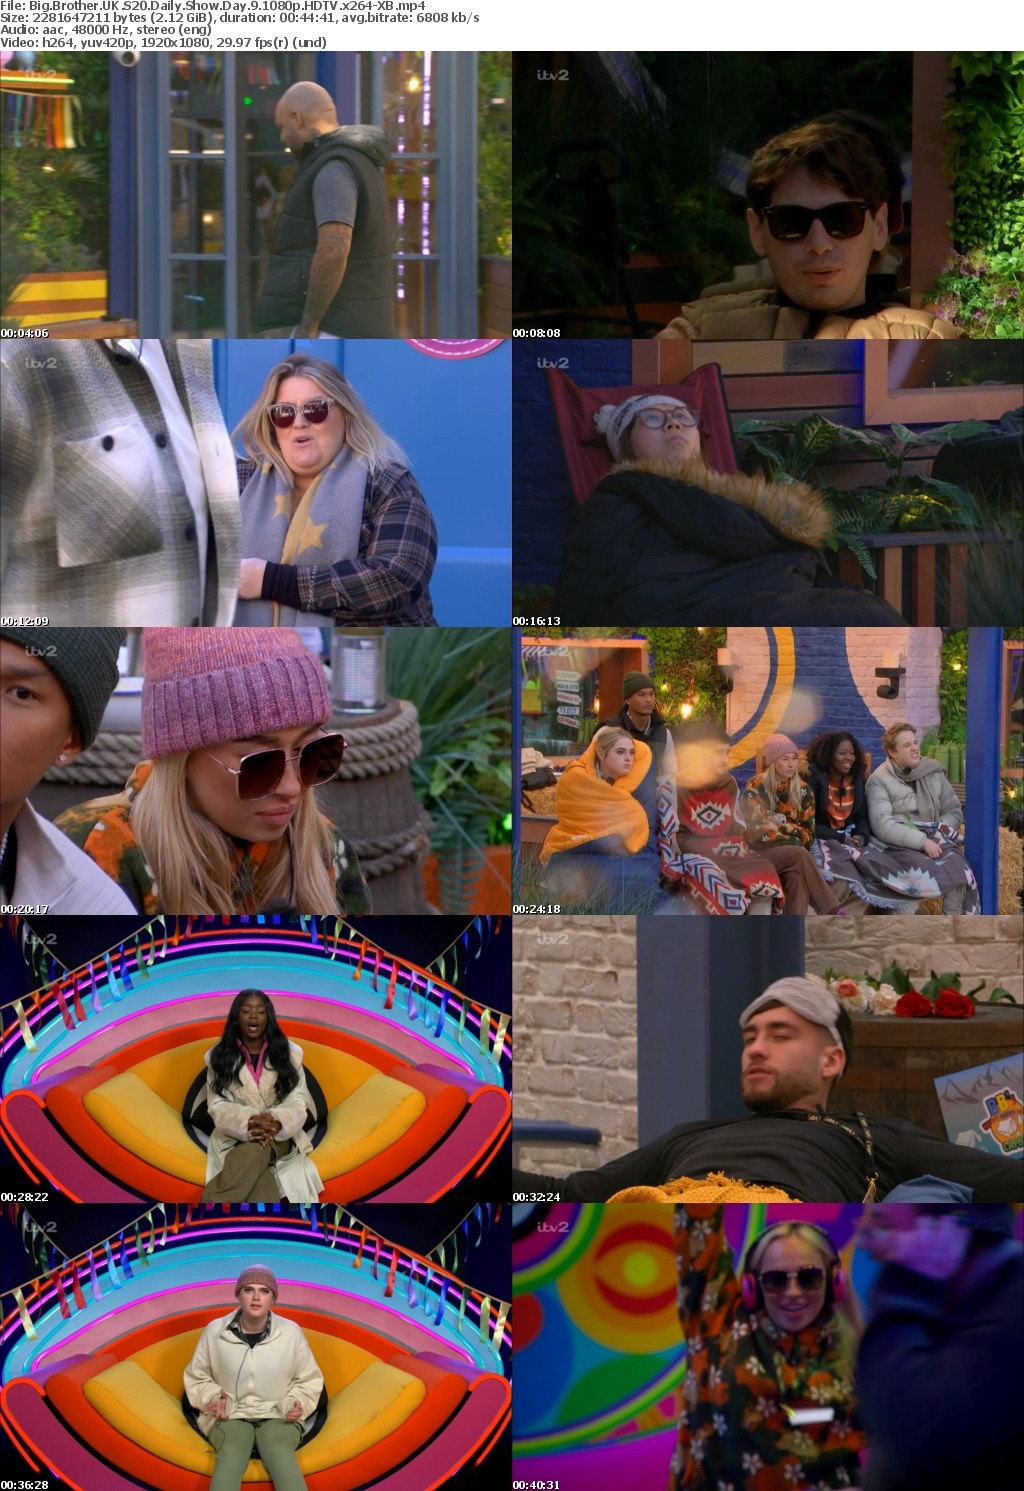 Big Brother UK S20 Daily Show Day 9 1080p HDTV x264-XB